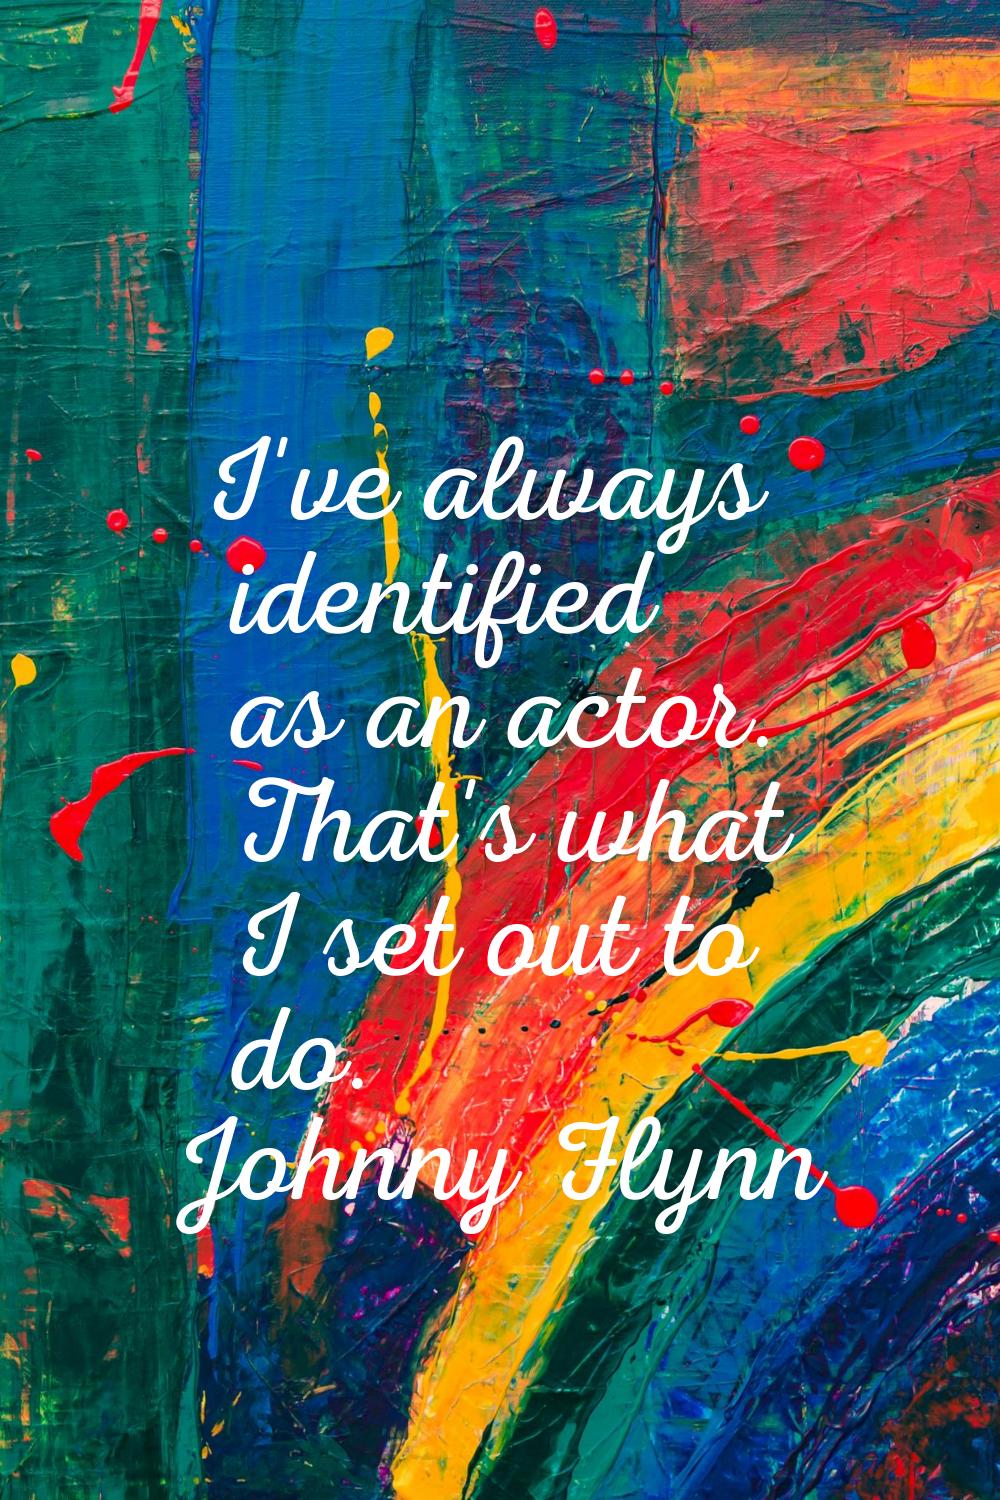 I've always identified as an actor. That's what I set out to do.